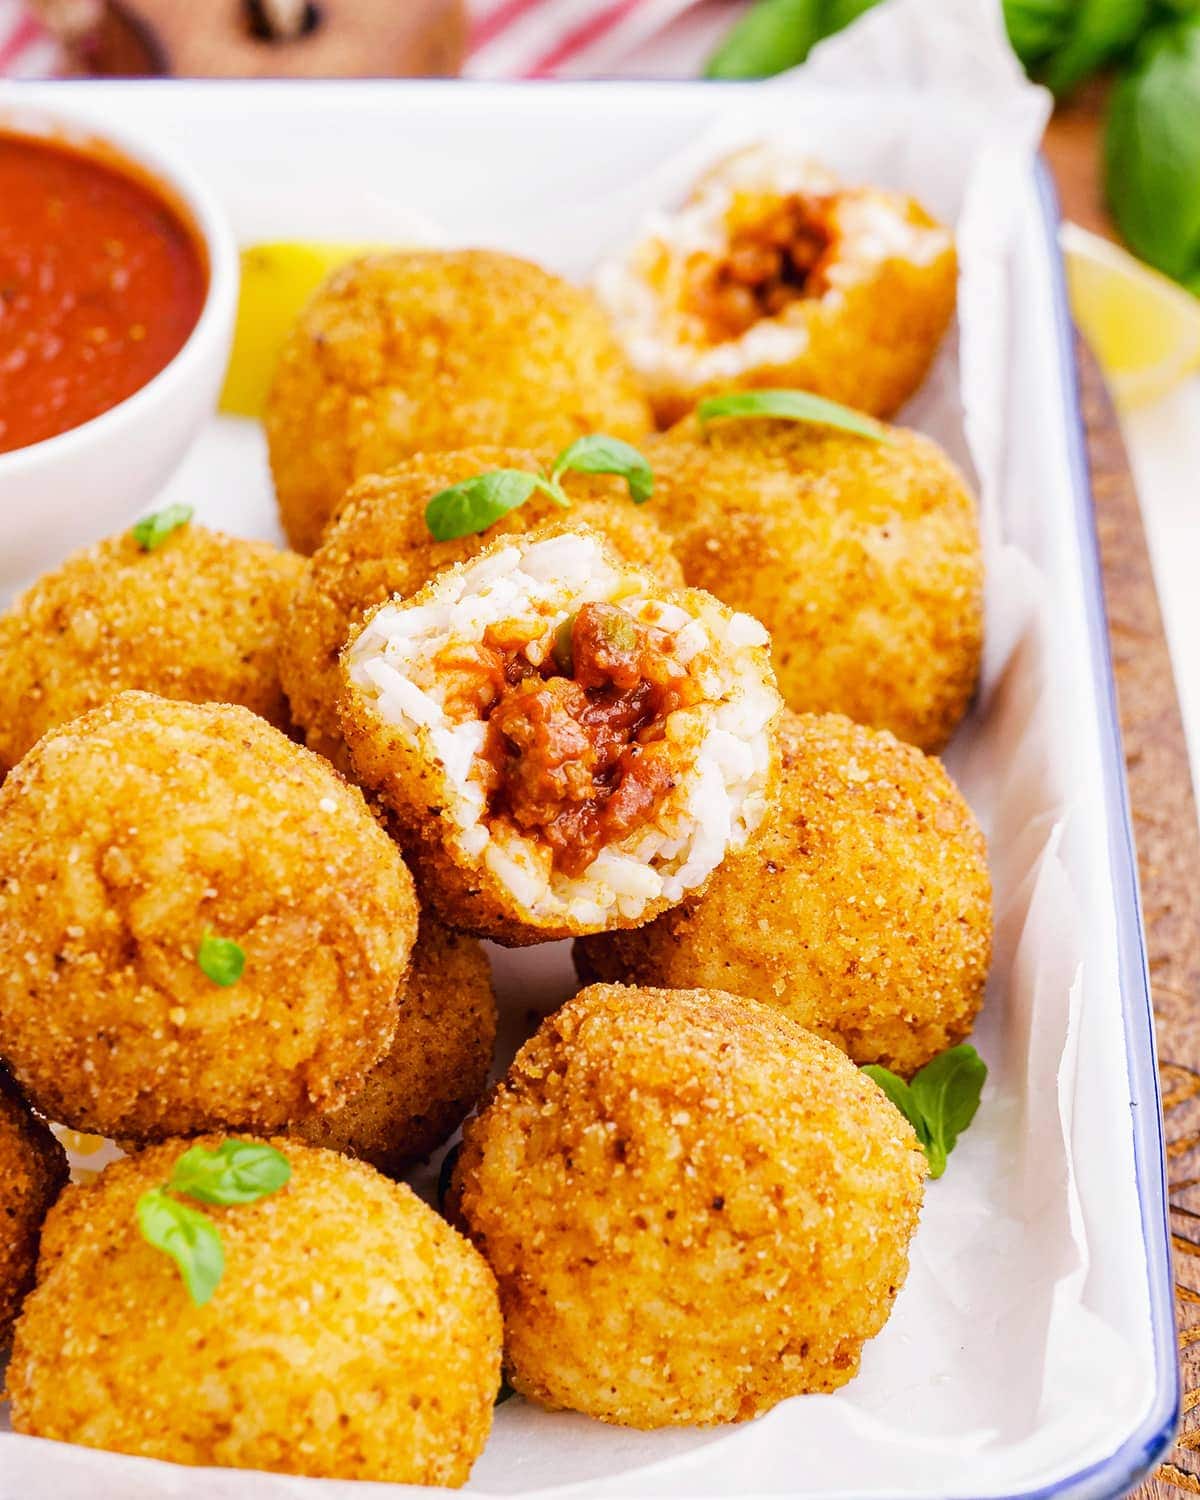 A pile of arancini rice balls, and one is bit into showing the ragu filling.